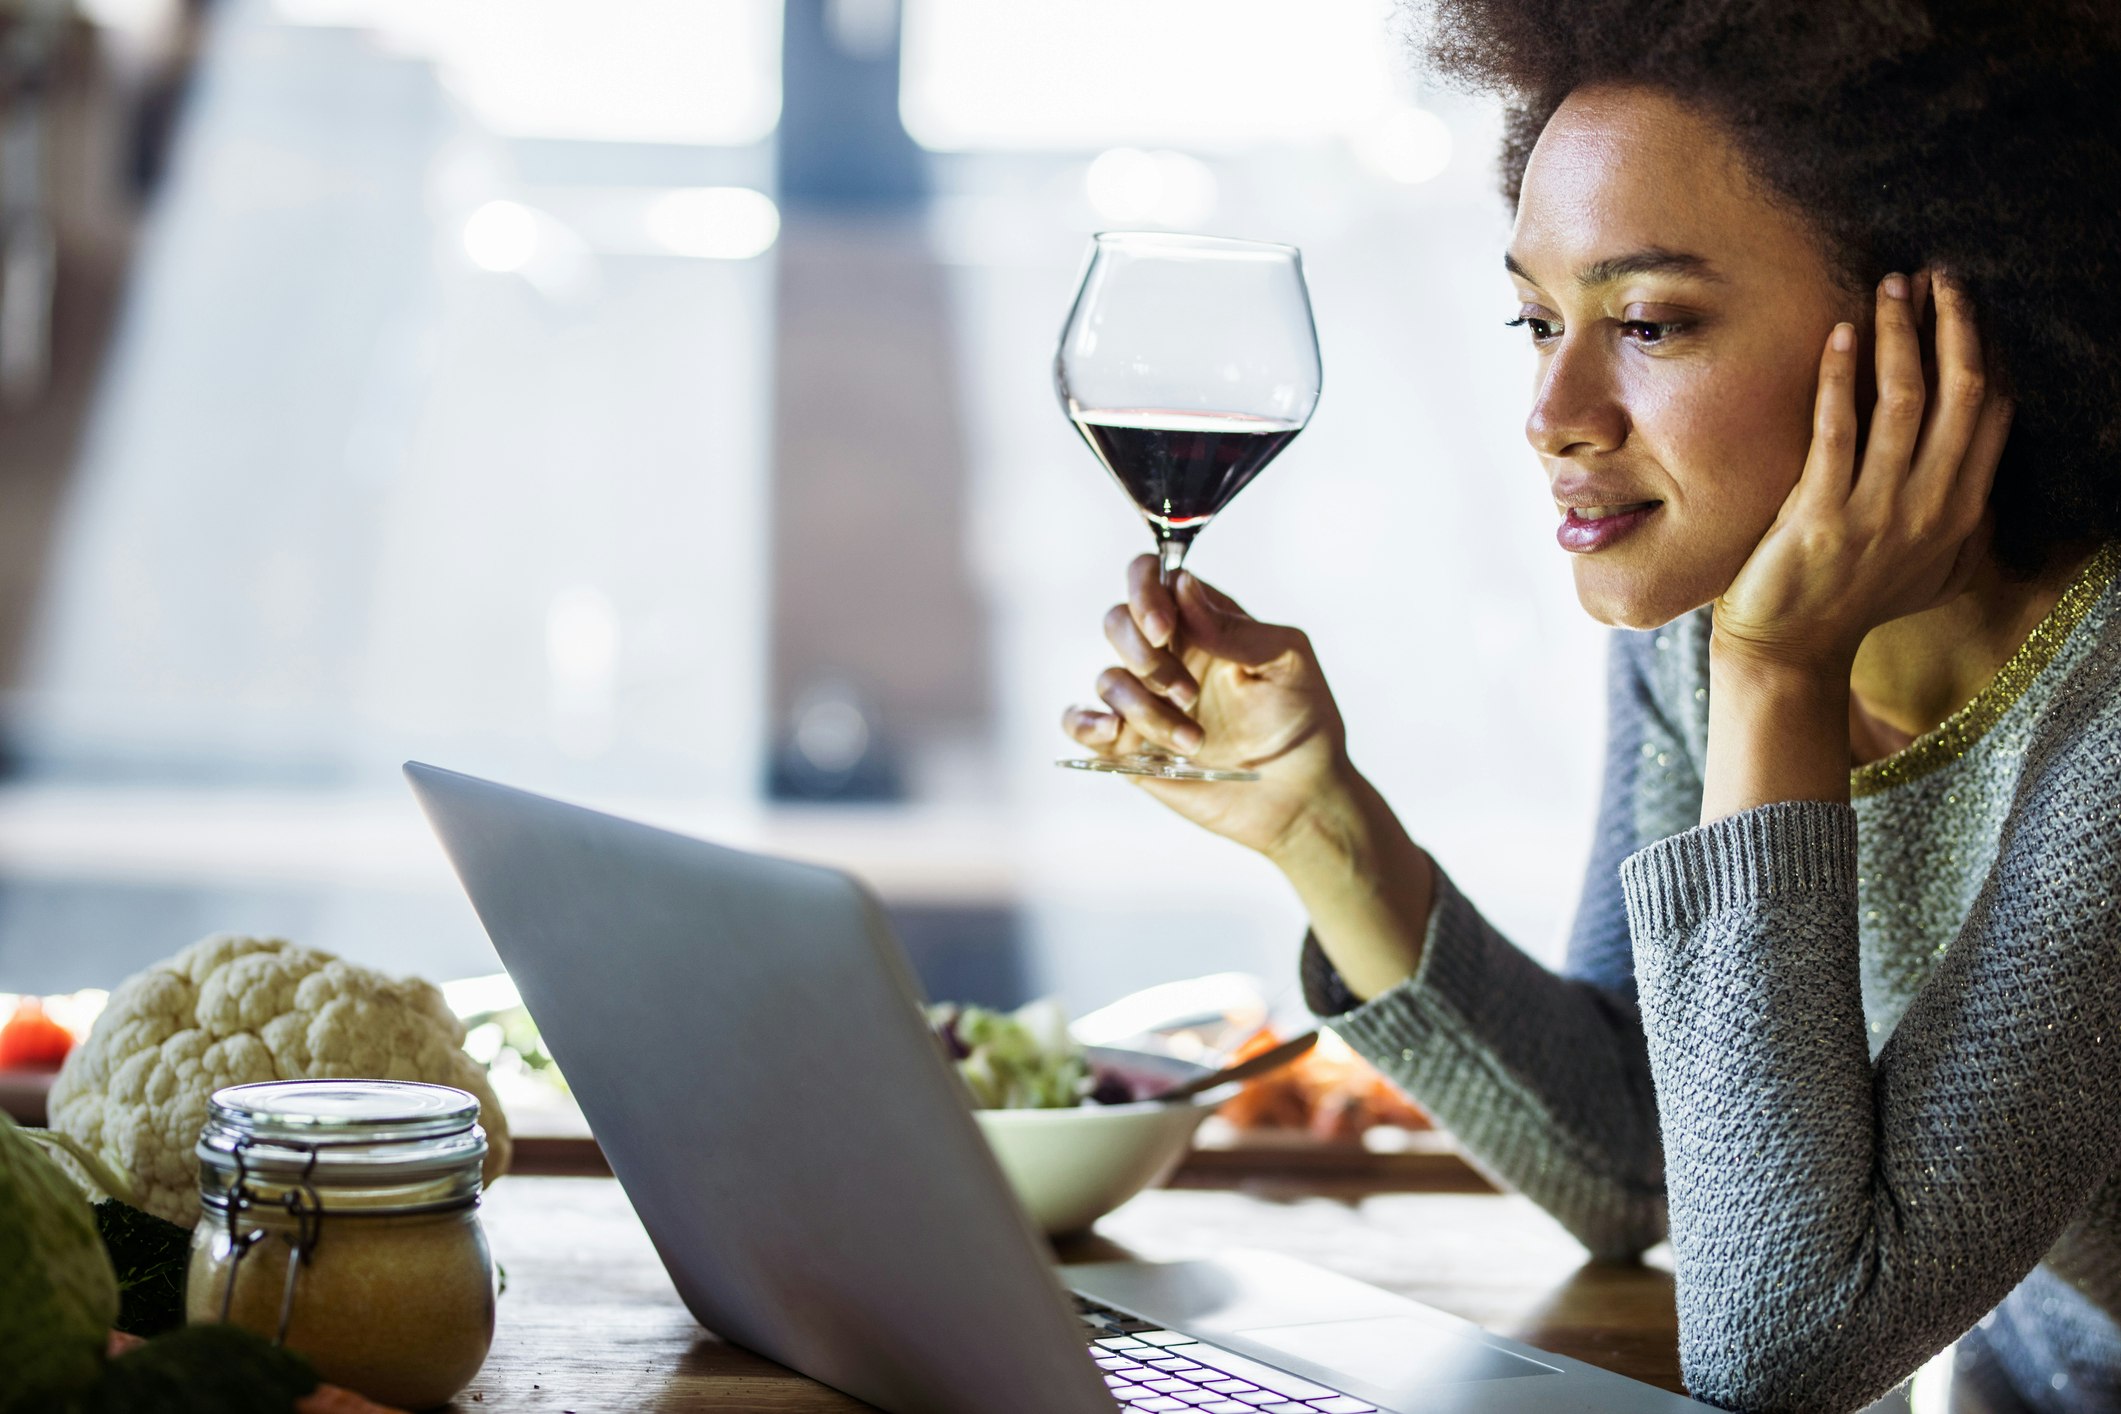 Smiling black woman drinking wine while reading online recipes in the kitchen.